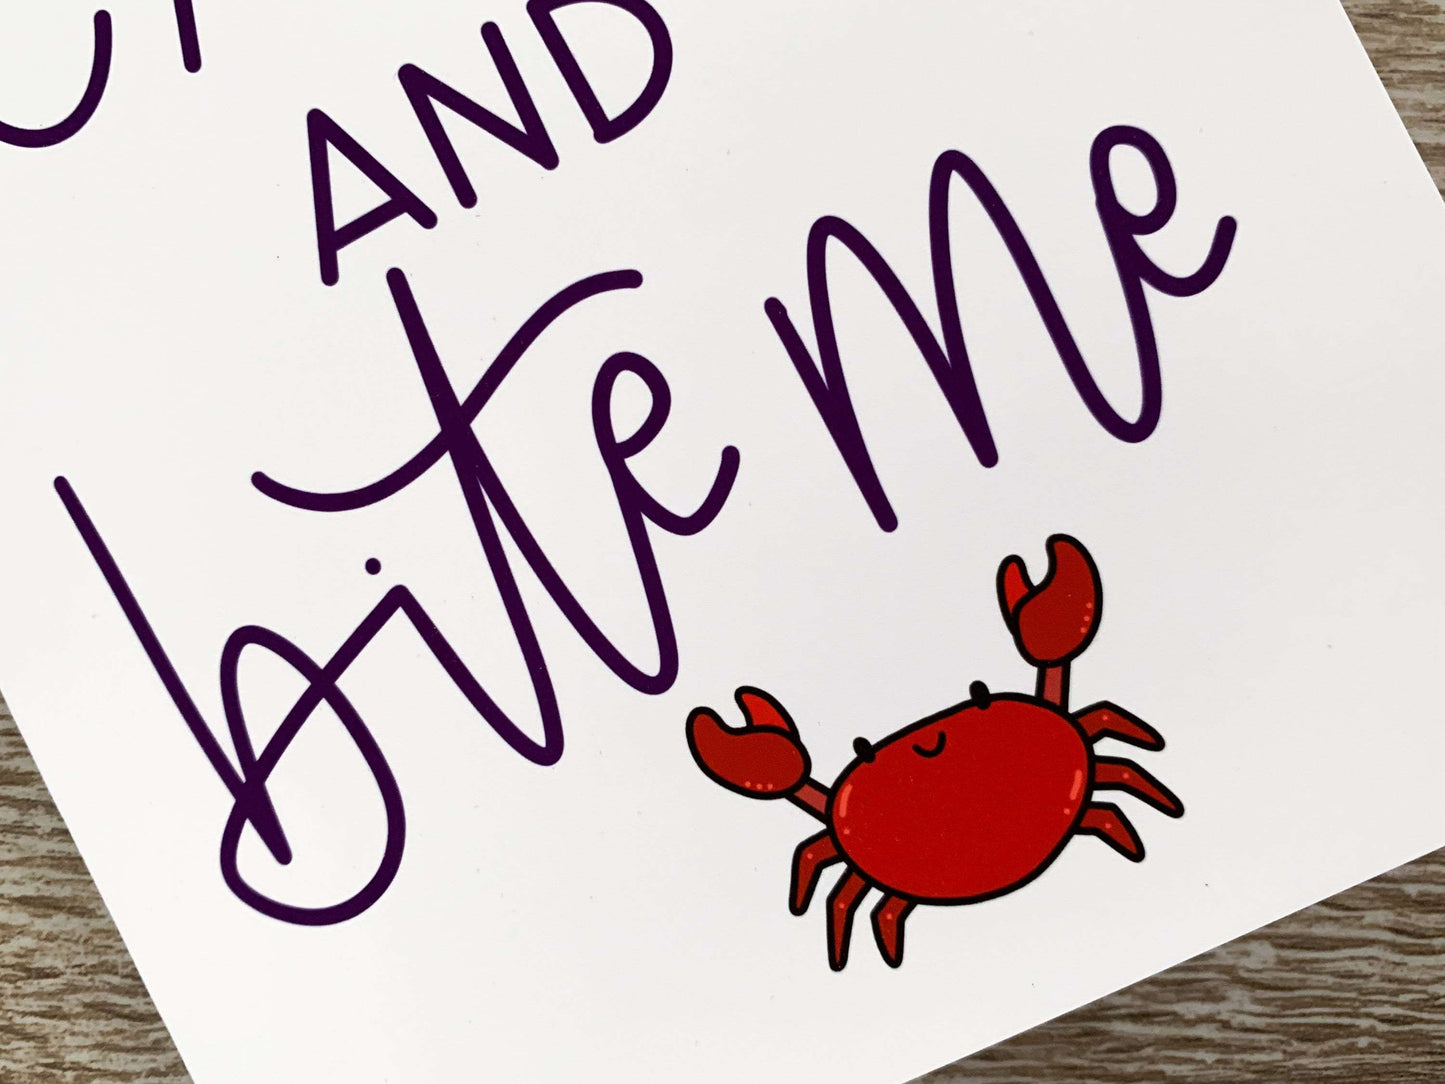 Funny Handmade Note Card Keep Calm and Bite Me by StoneDonut Design